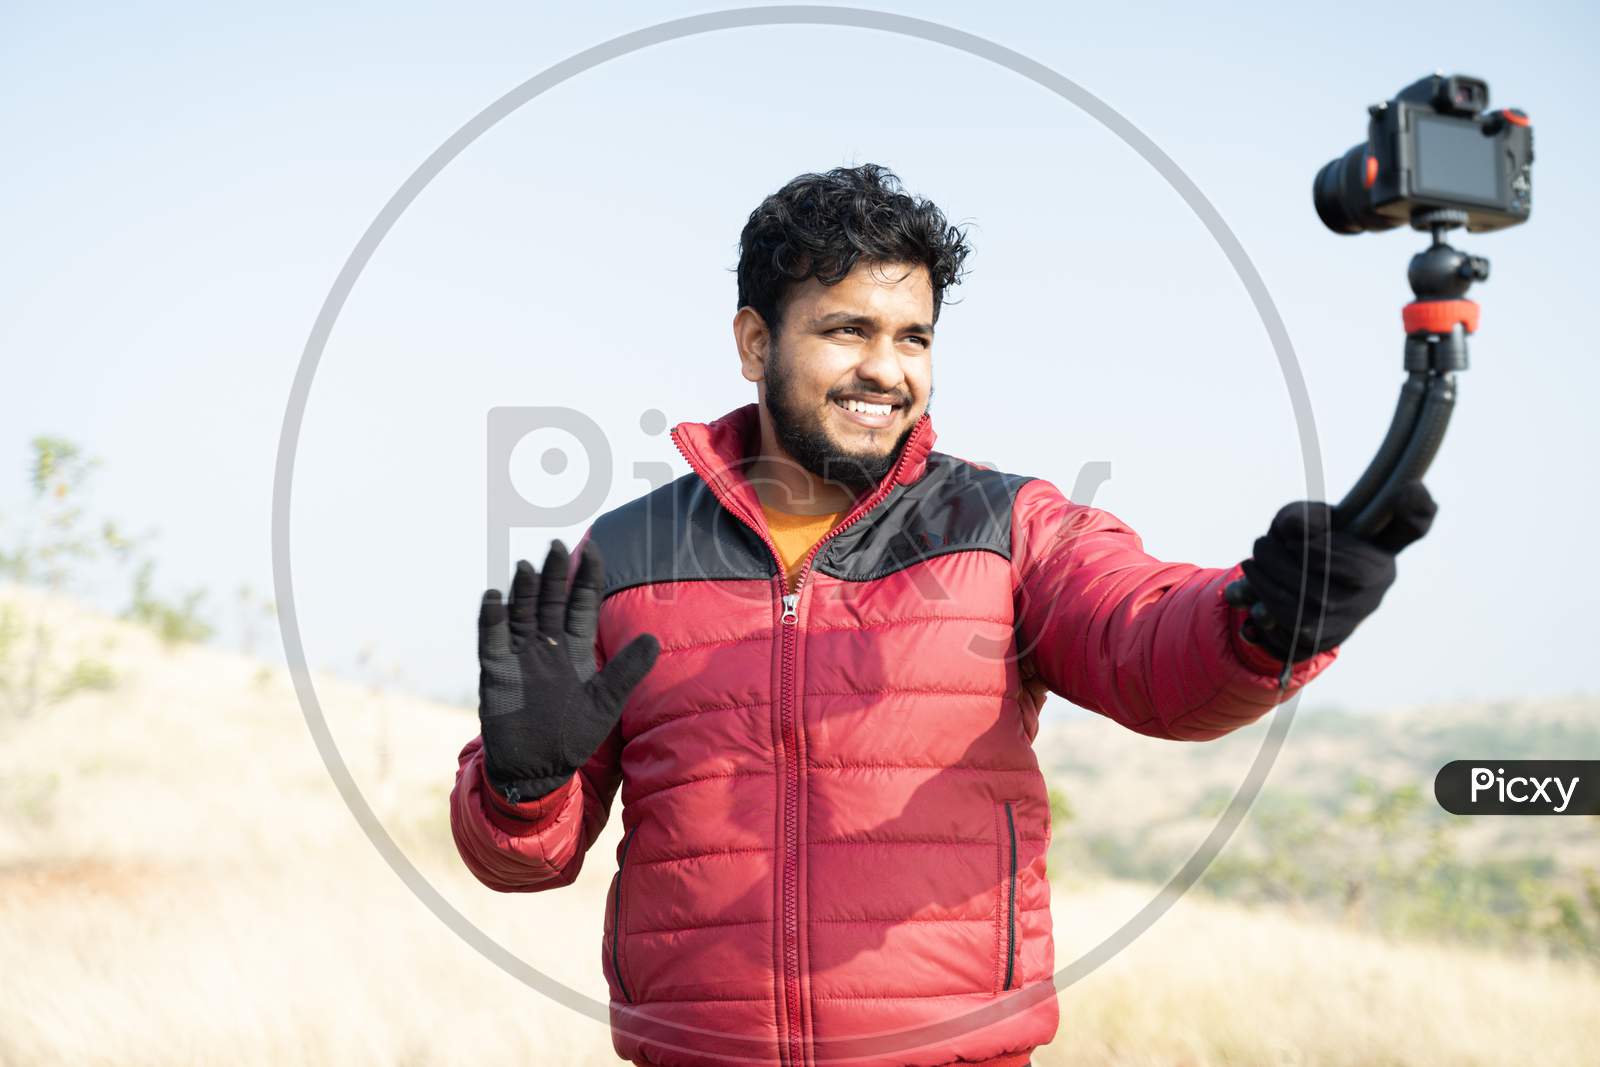 Young Traveller Busy Talking With Camera On Top Of Mountain - Concept Of Travel Vlogger, Blogger Or Influencer Recording Video During Hiking.